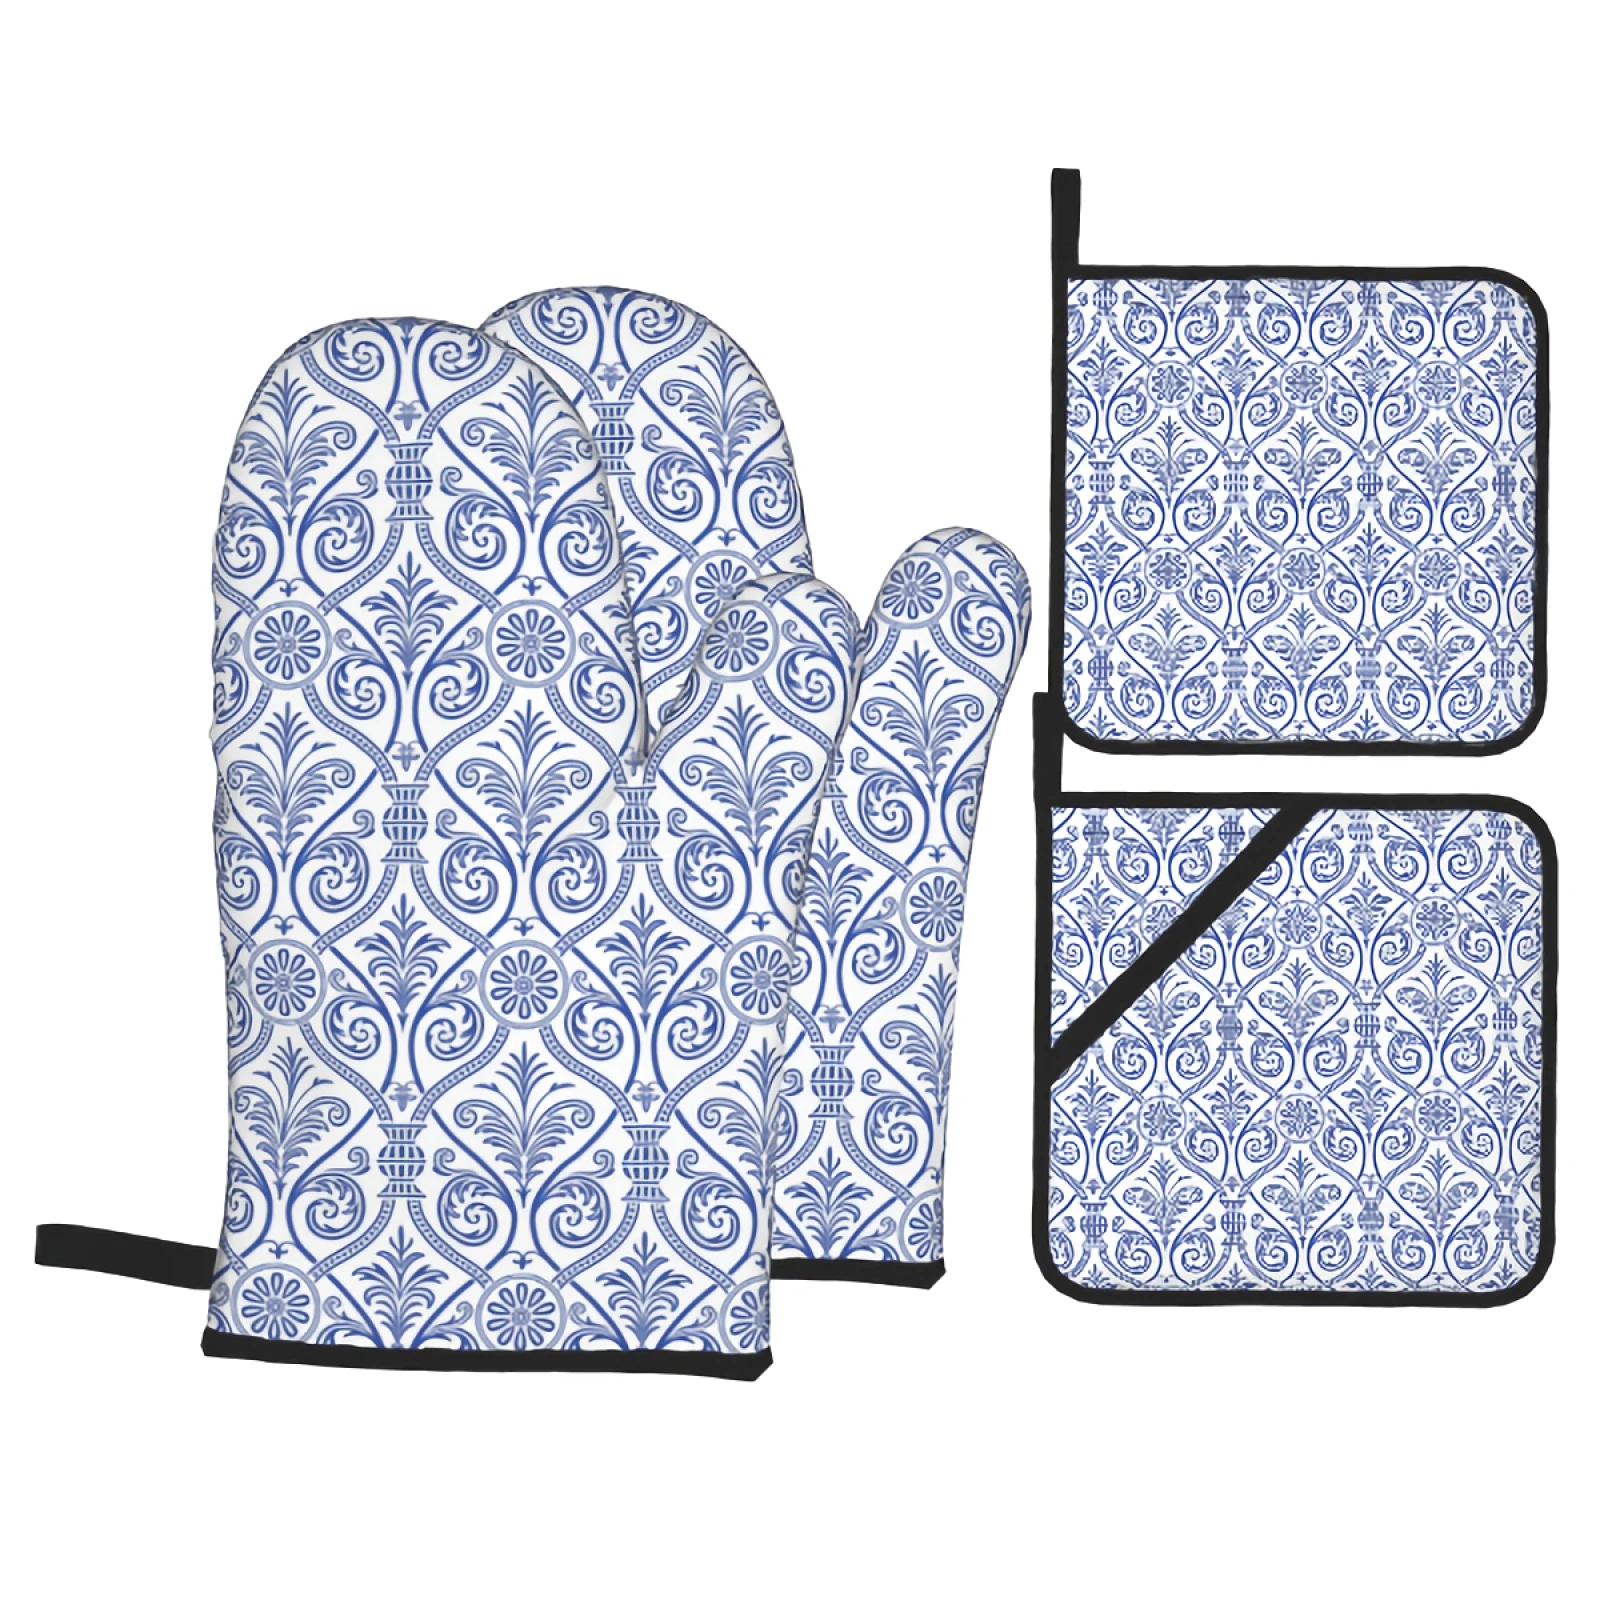 

Blue Pattern 4PC Oven Mitts and Pot Holders Sets for Cooking Baking Grilling